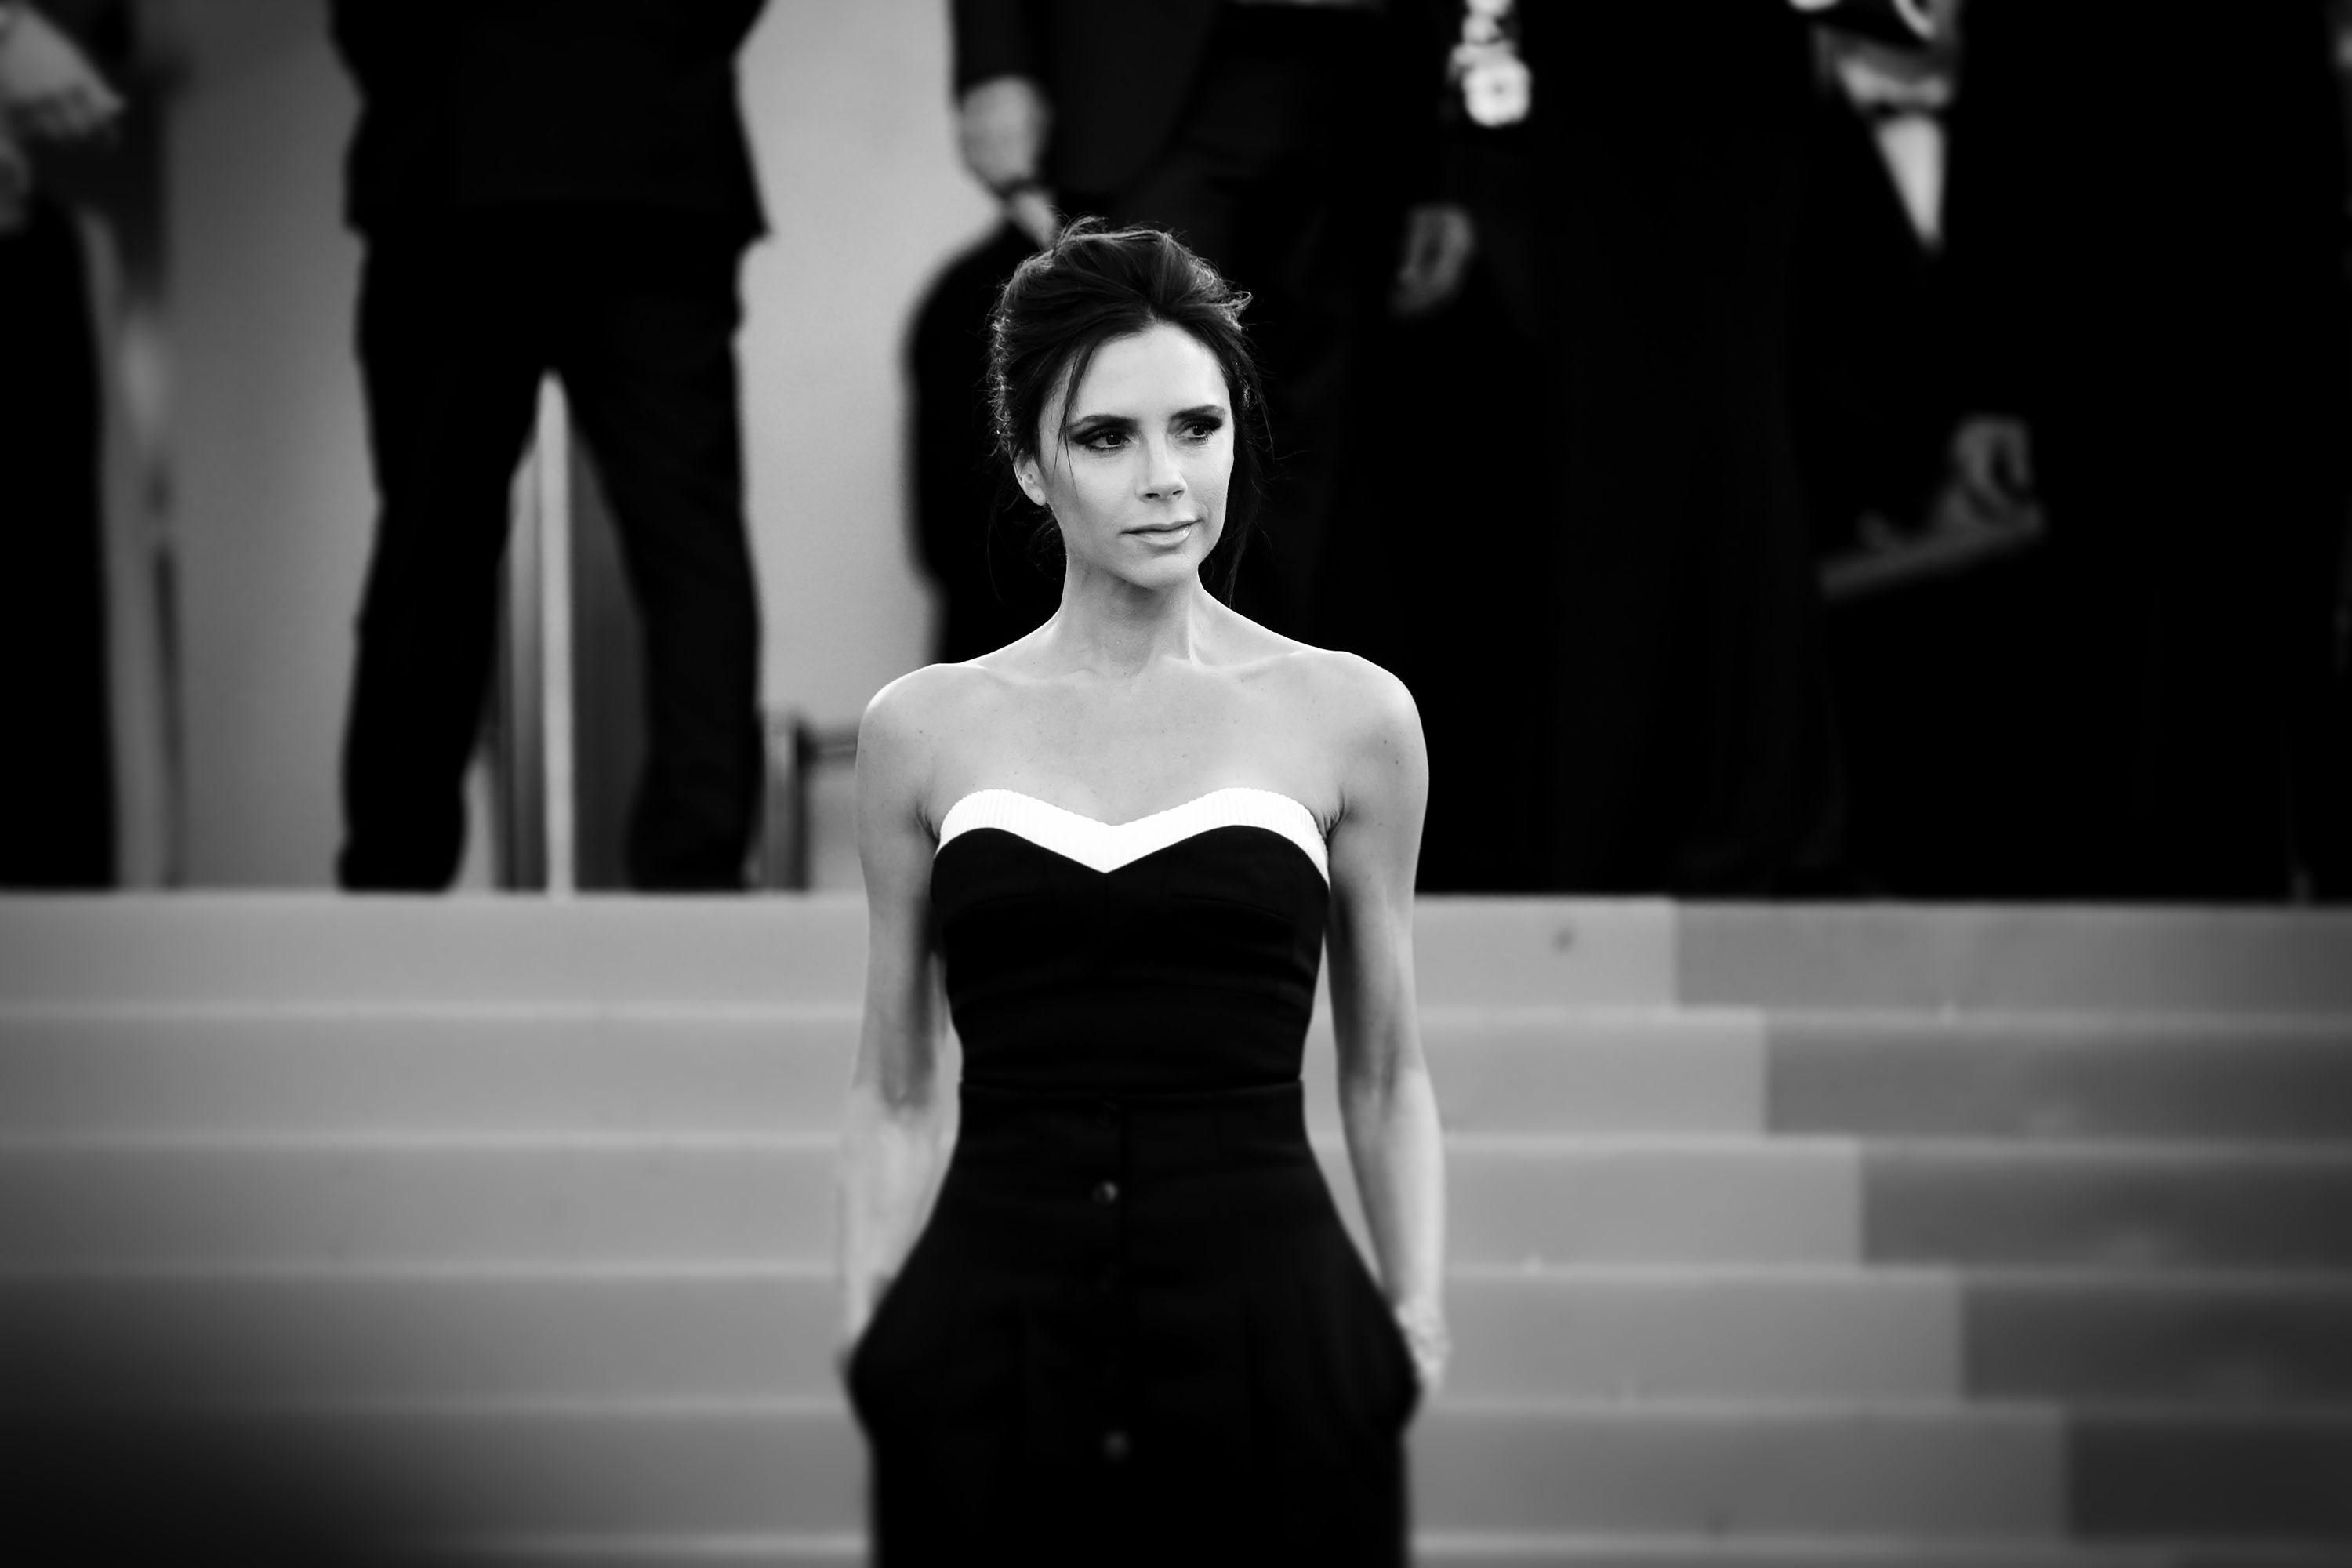 How Victoria Beckham won over the fashion world - from Posh Spice